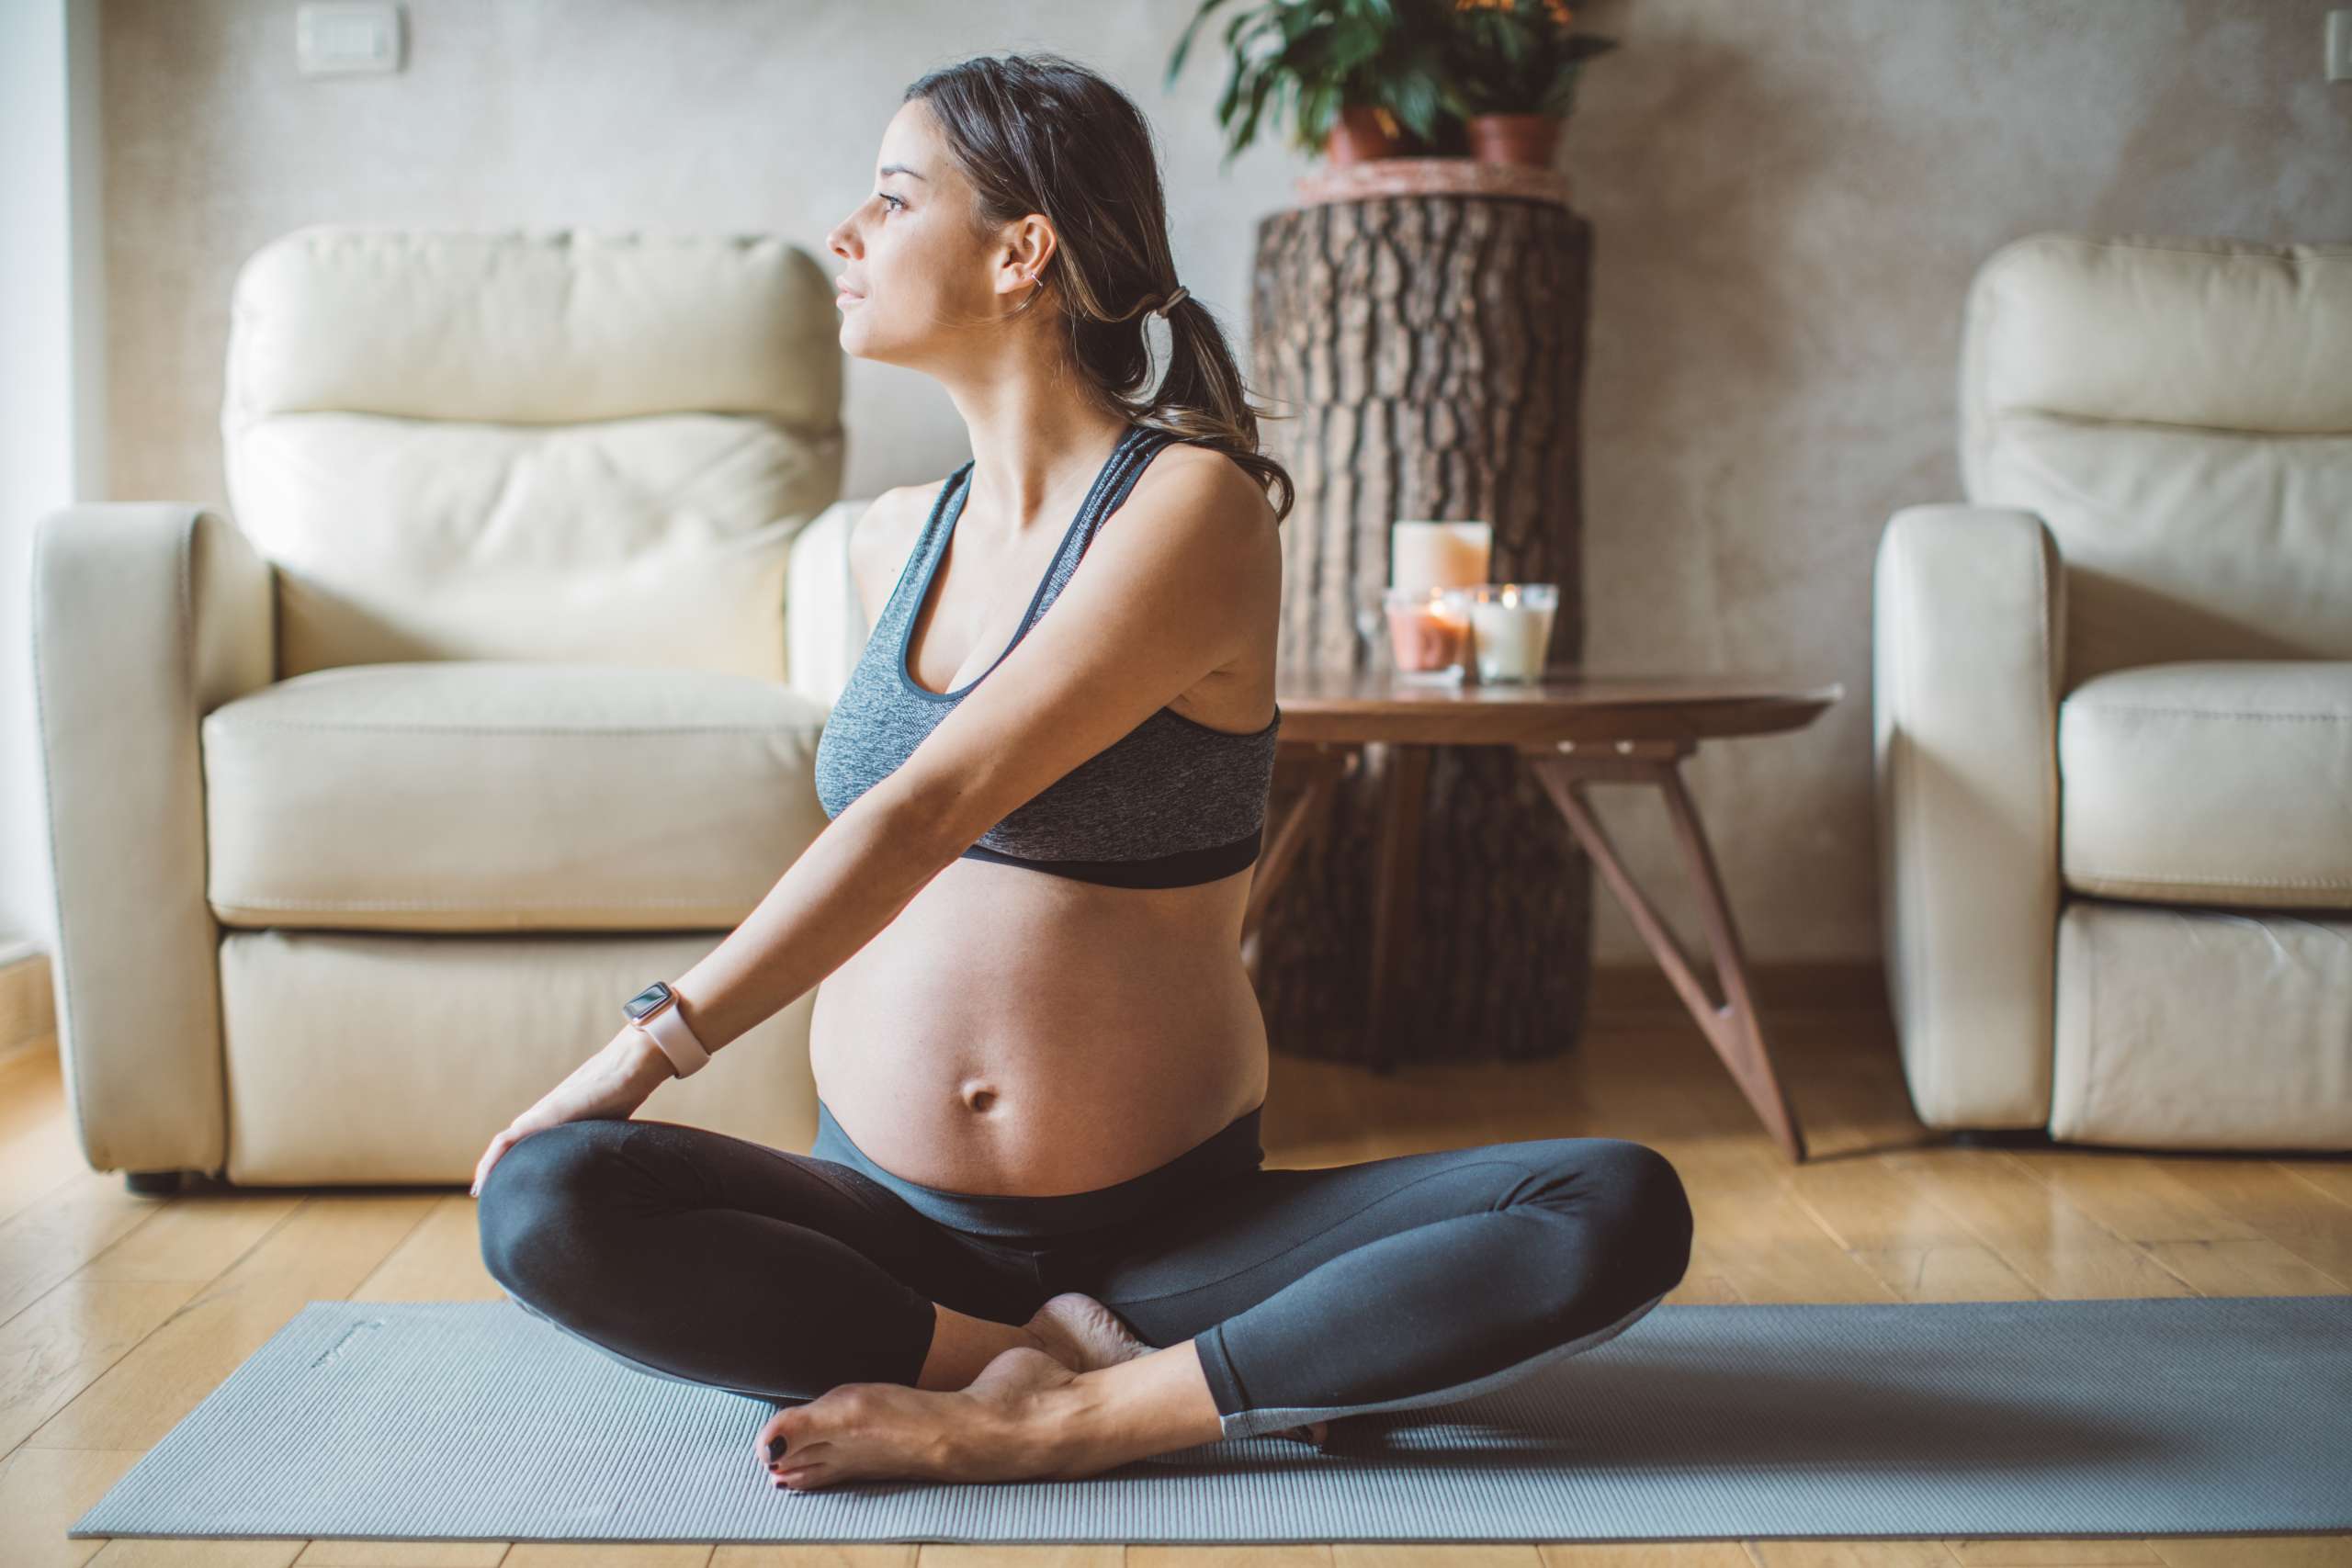 Pregnant woman exercise yoga- Manage Second Trimester Discomfort